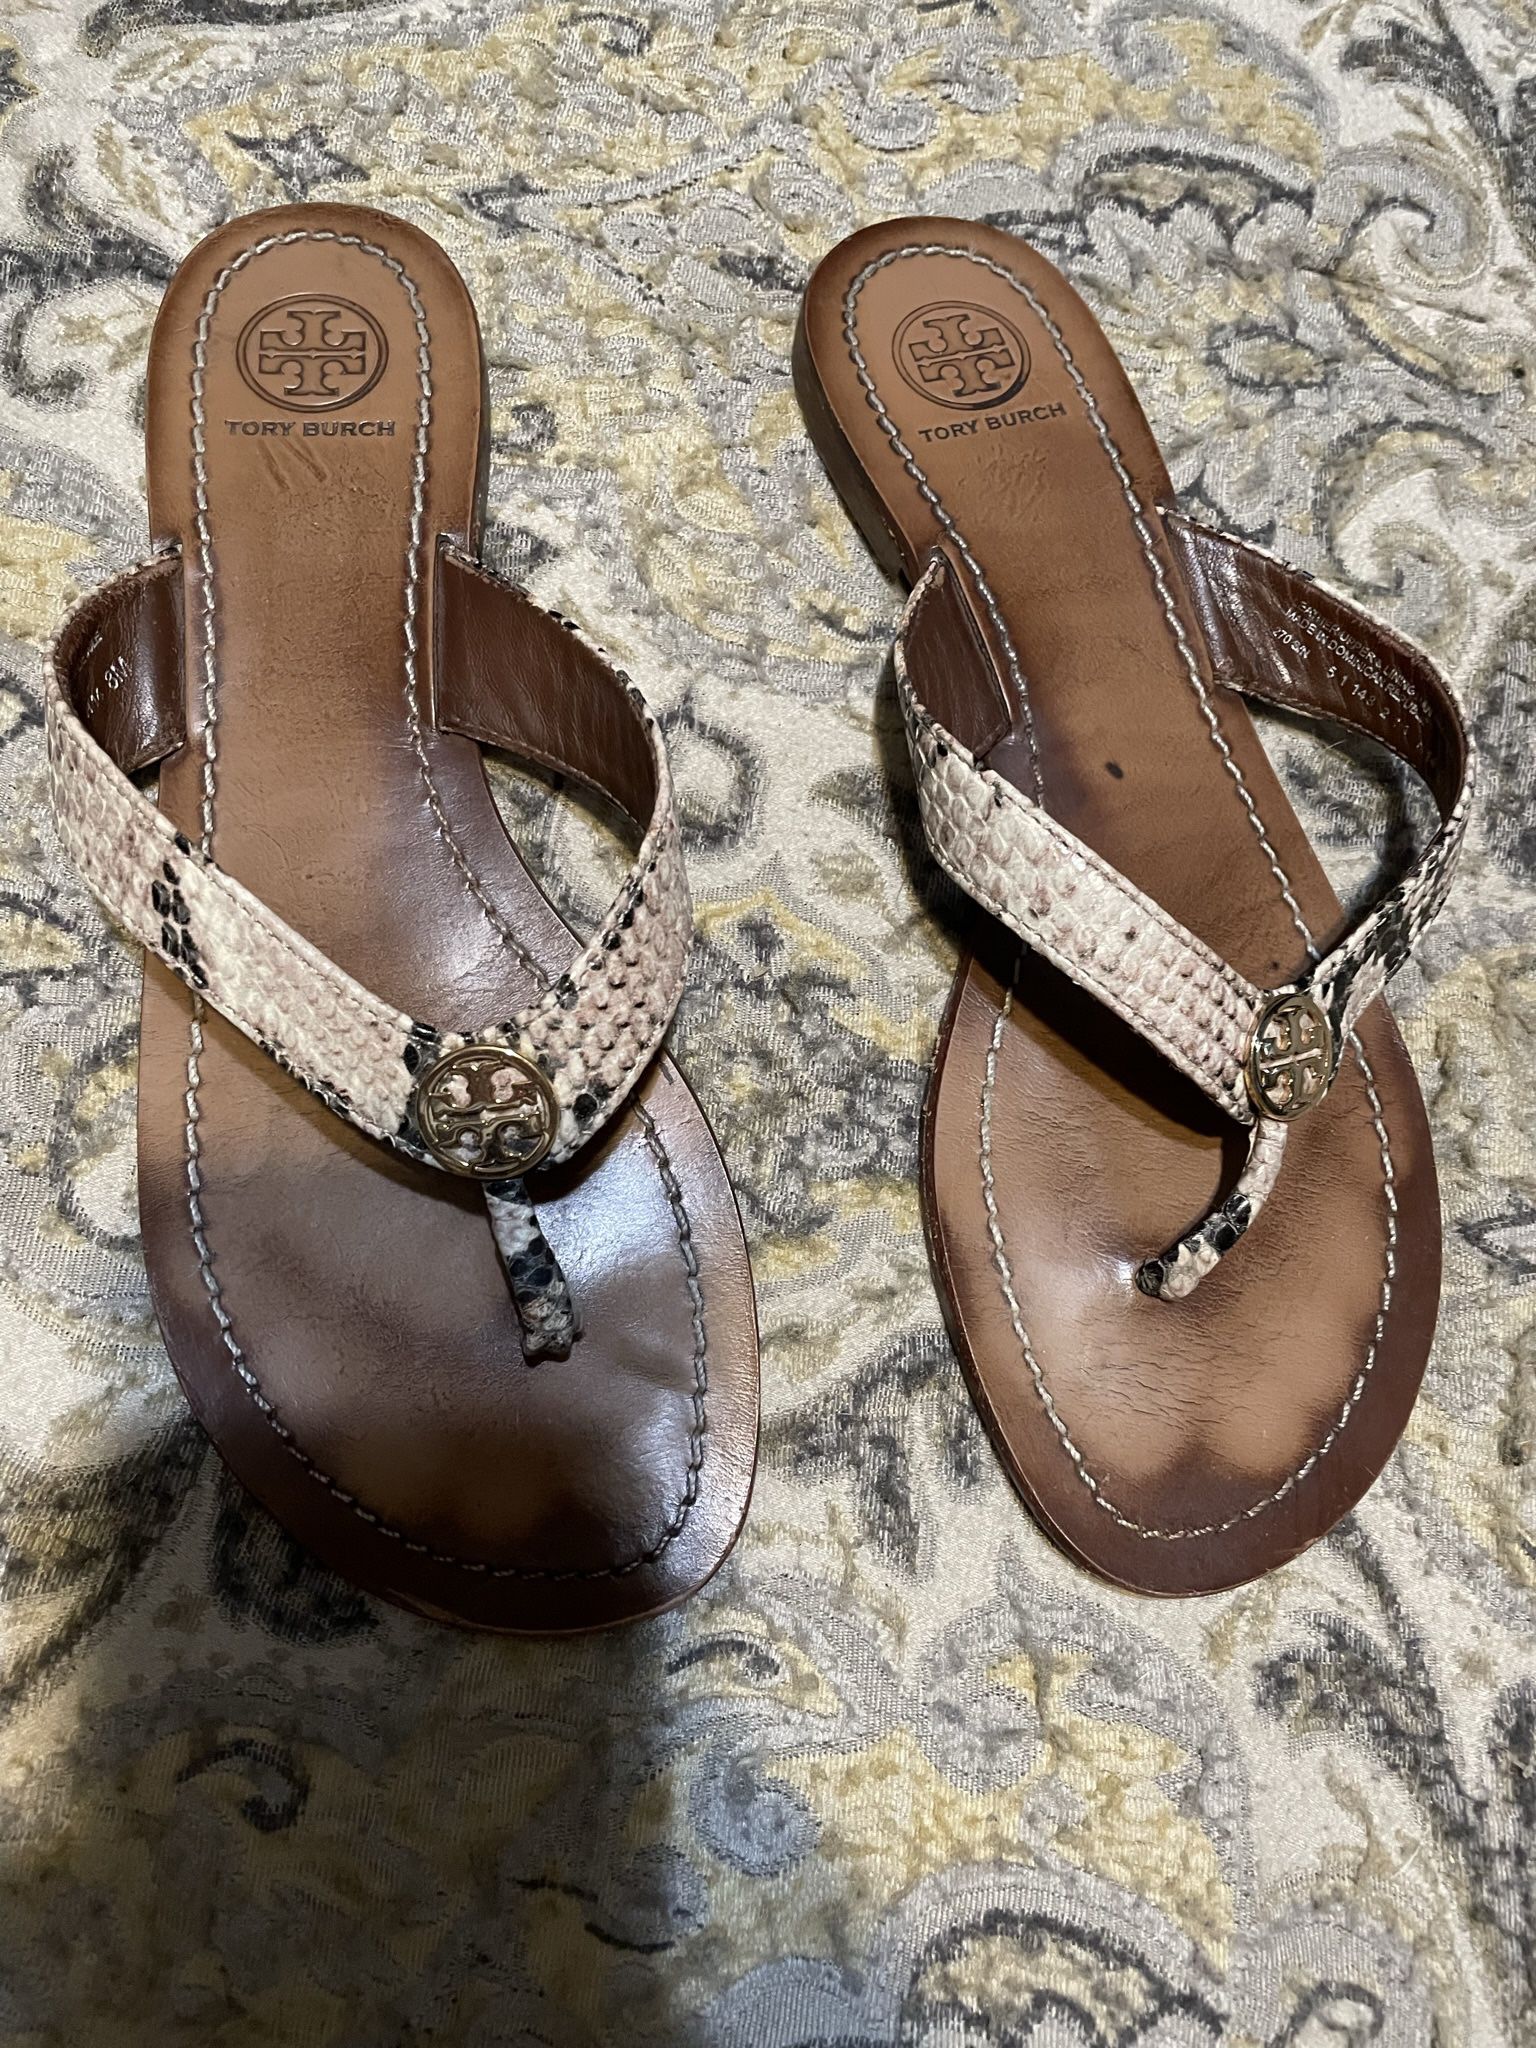 Authentic Tory Burch Sandals Size 8